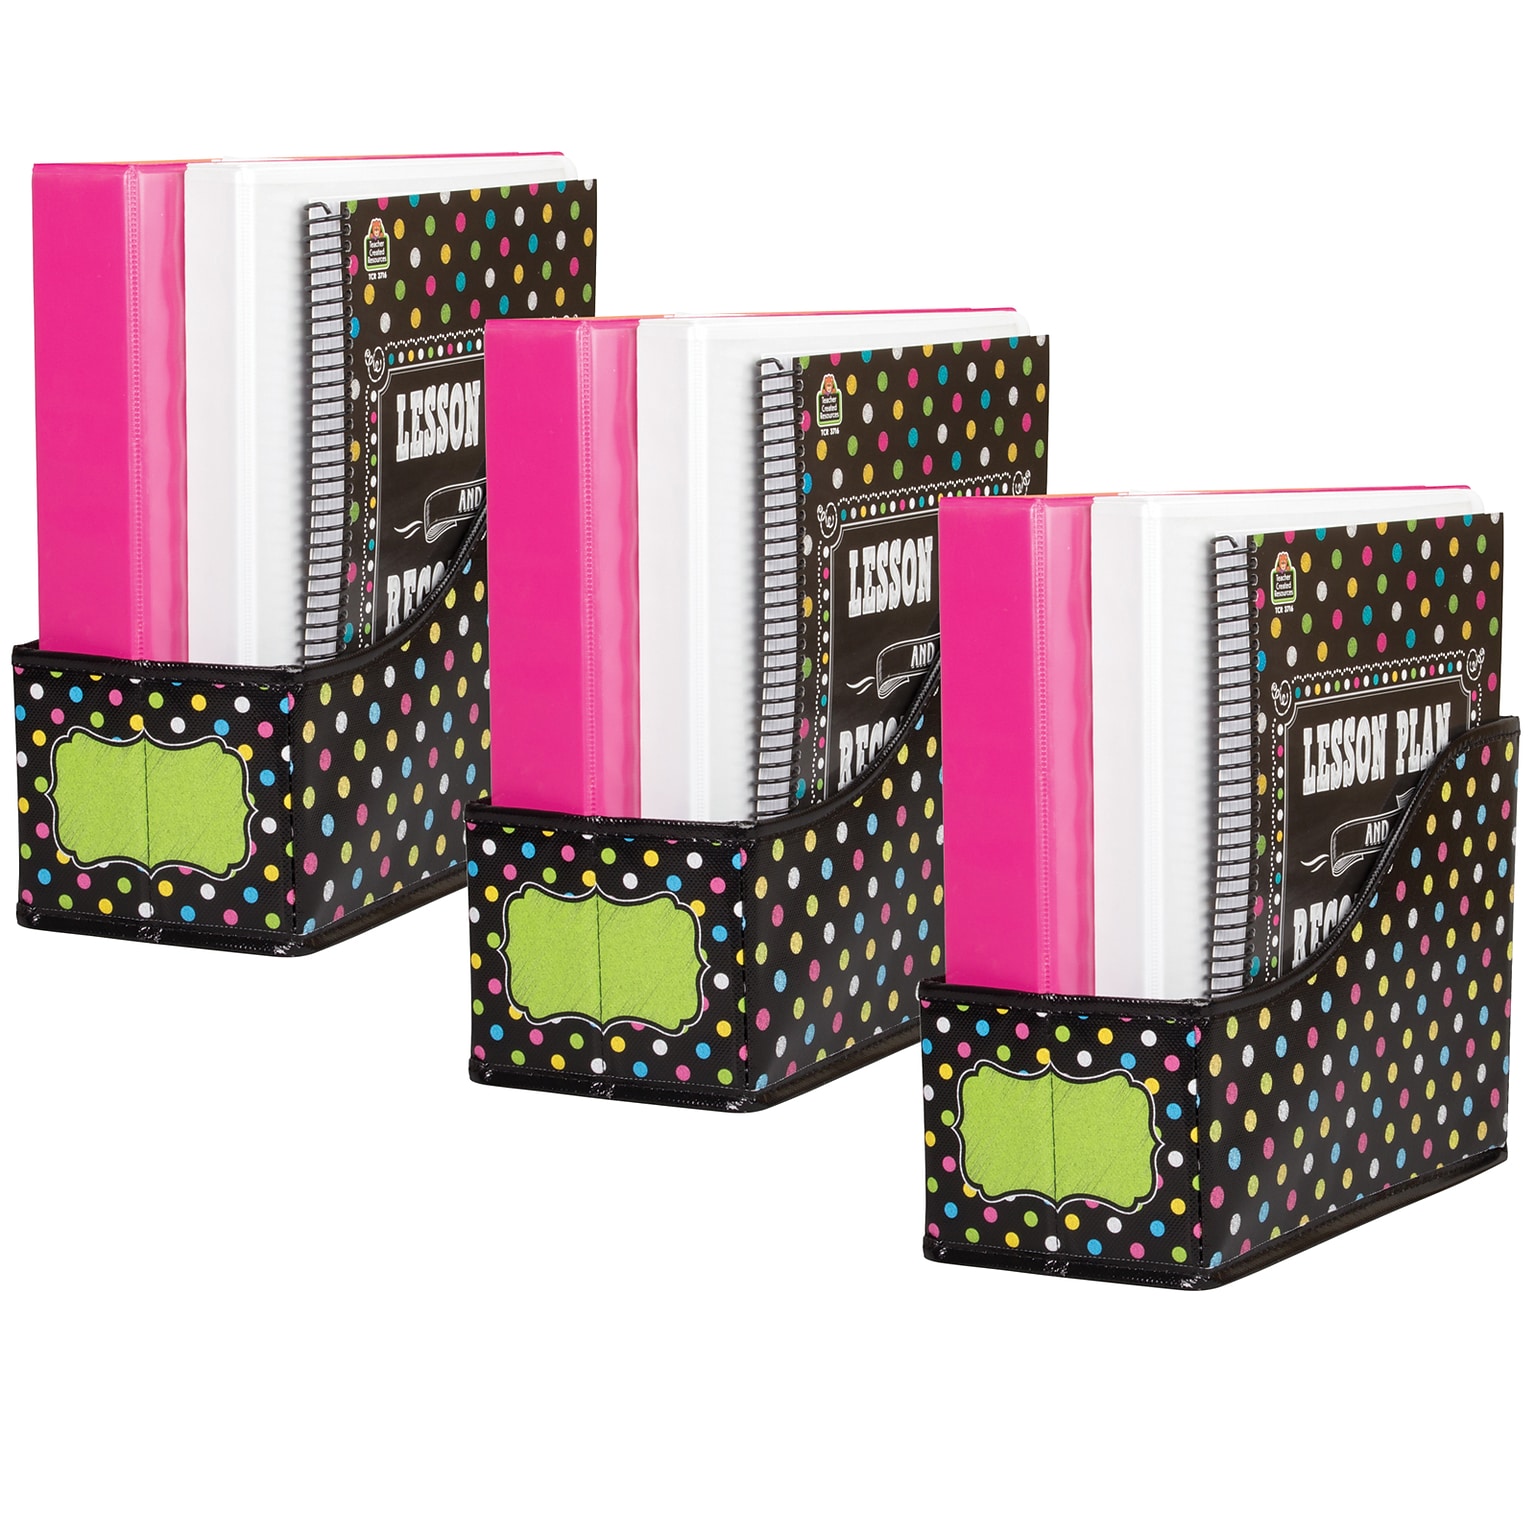 Teacher Created Resources Chalkboard Brights Book Bin, 5 x 8 x 11, Multicolored, Pack of 3 (TCR20784-3)